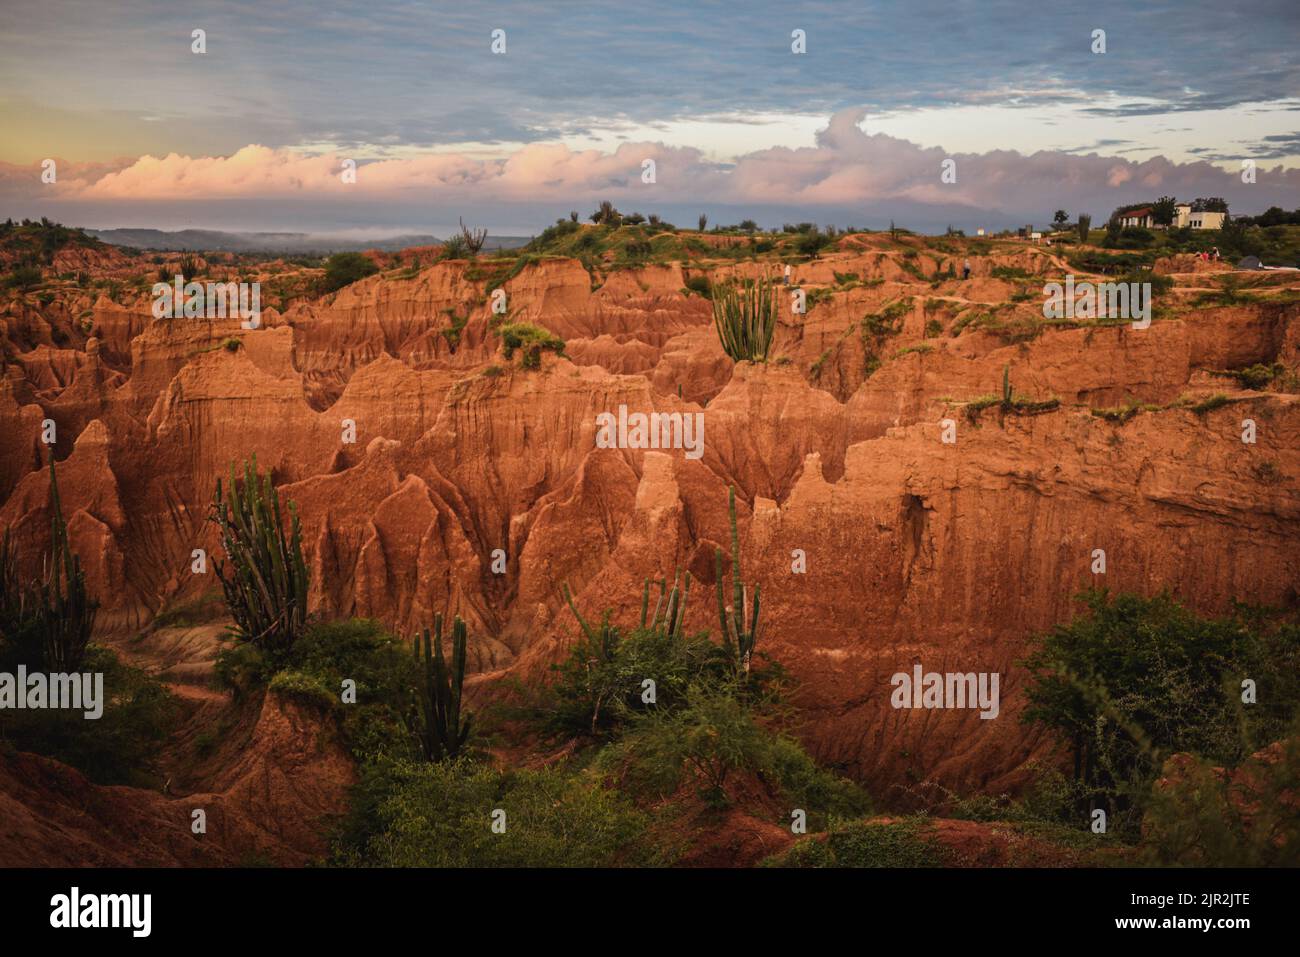 The Tatacoa Desert, located north of Huila Department in Colombia Stock Photo